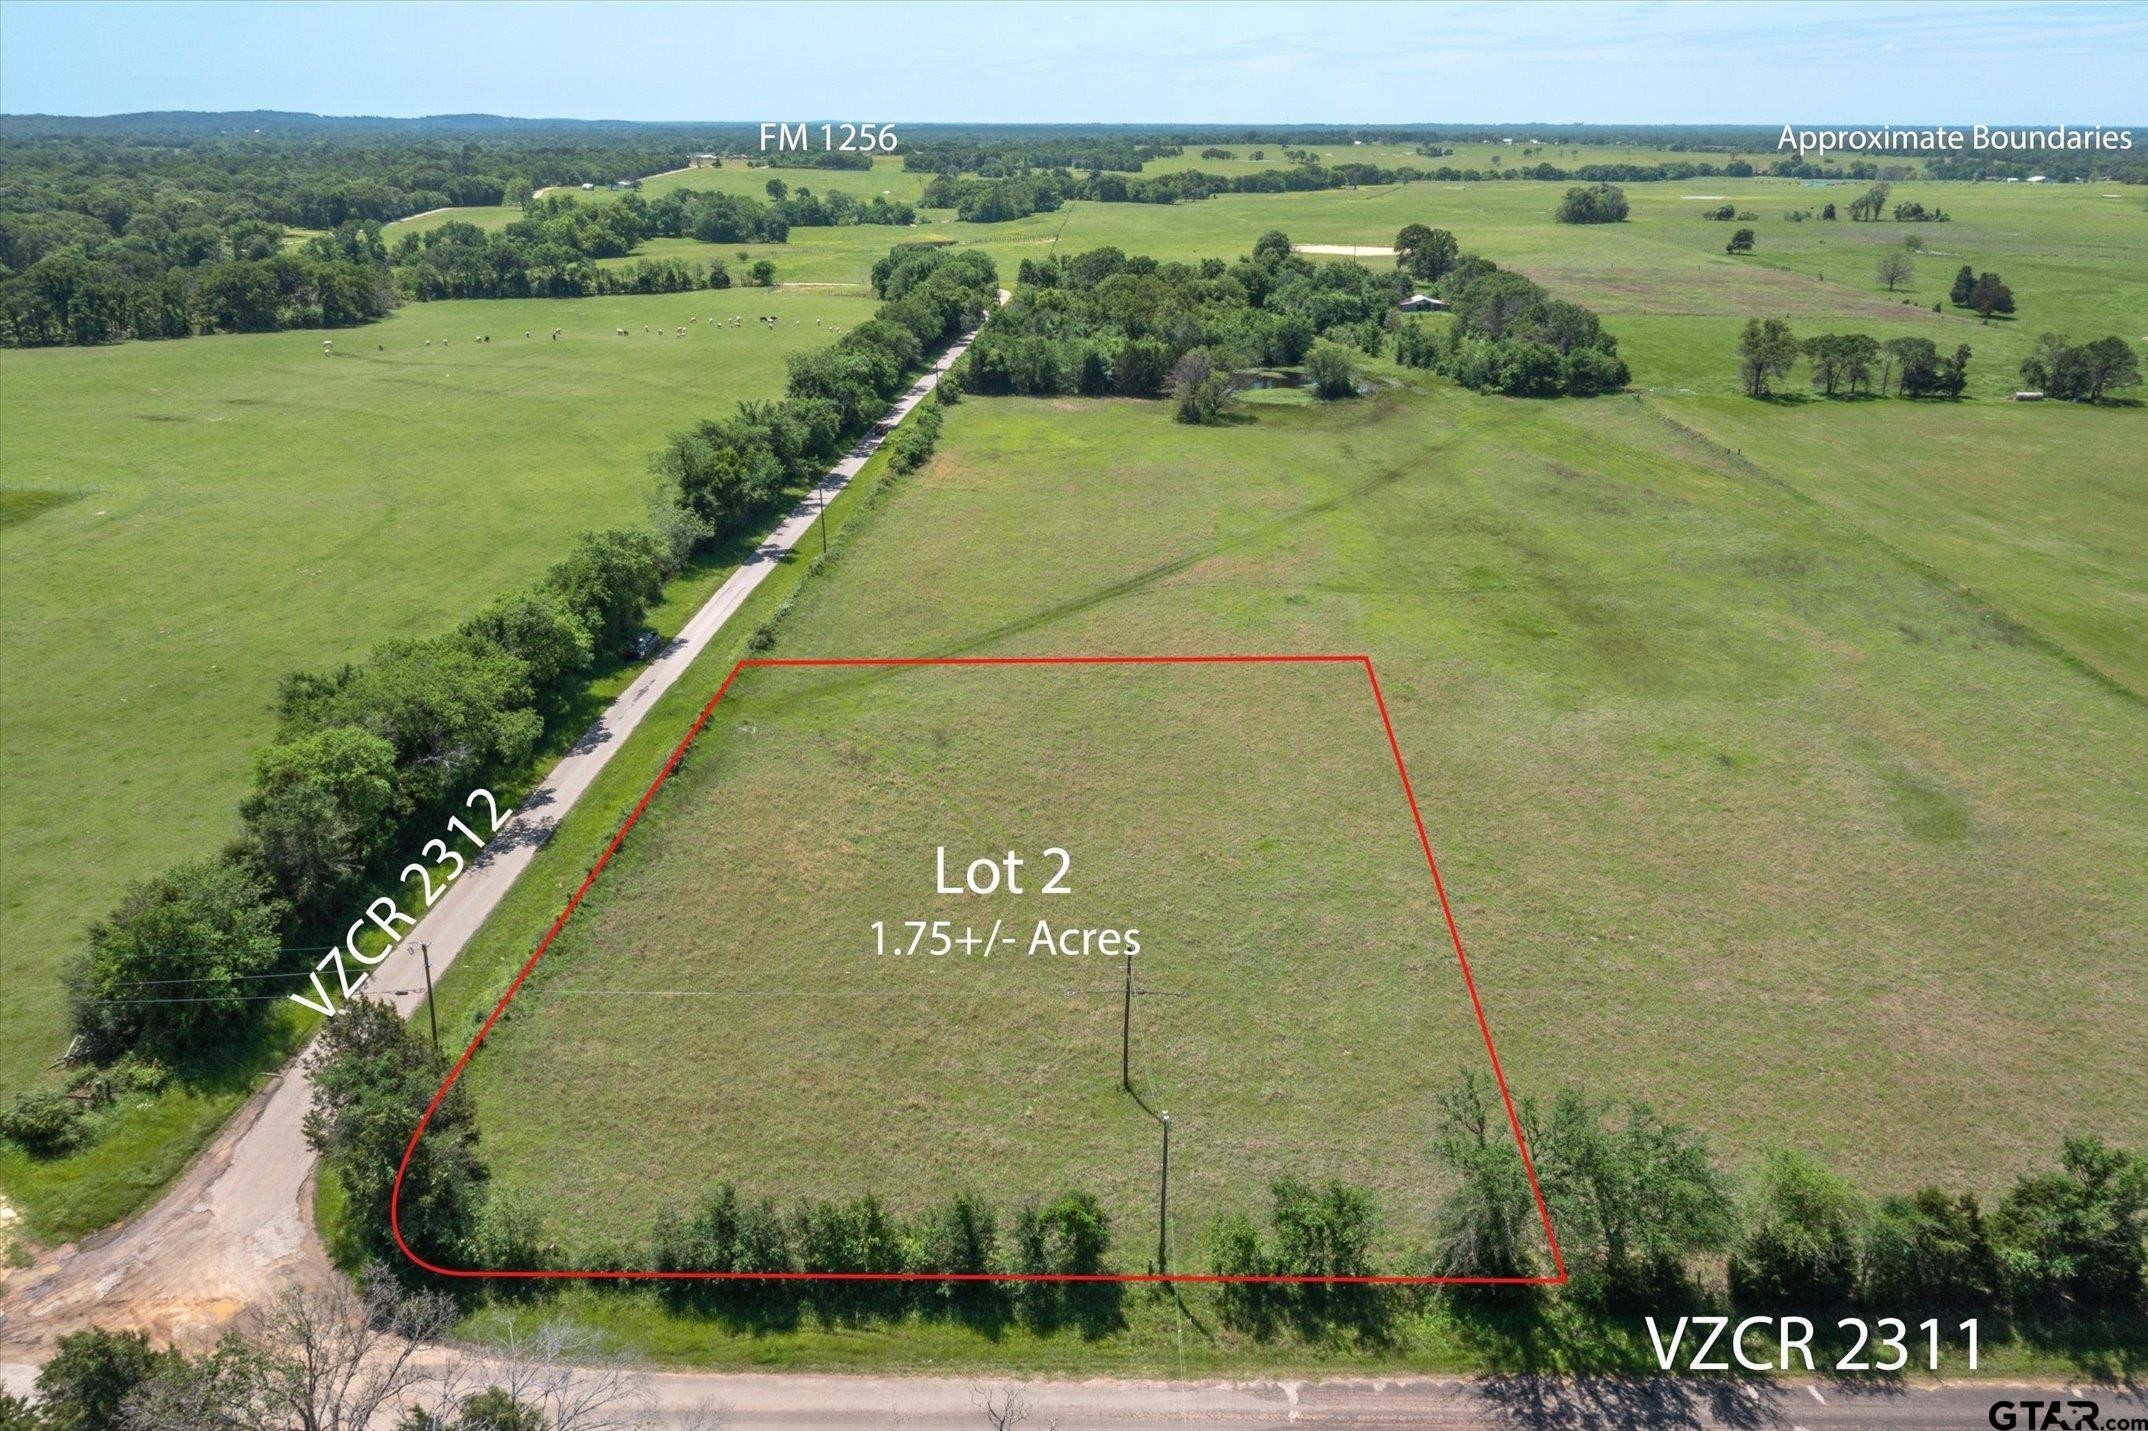 1. Tbd Lot 2 (Canton Isd) Vz County Road 2311